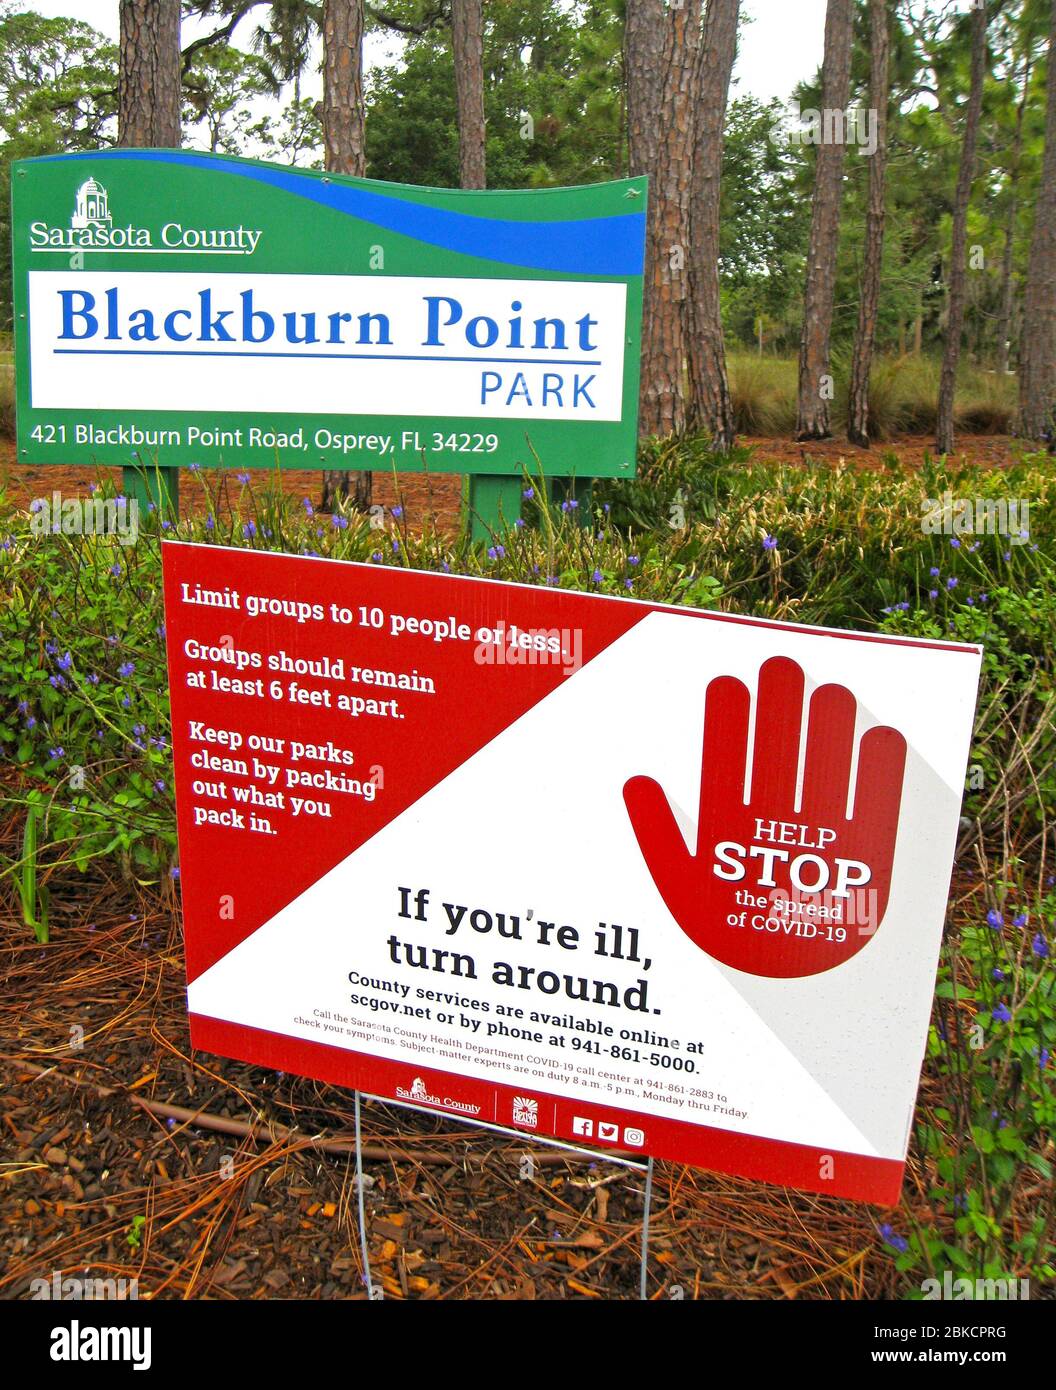 This sign warns would-be visitors who are sick not to enter a county park in Florida, USA. Its purpose is to help stop the spread of COVID-19, the novel coronavirus infectious disease that caused a worldwide pandemic beginning in 2020. The sign also is a reminder of local governmental guidelines that limit groups to 10 people or less, and that groups should remain at least 6 feet (1.8 meters) apart. Stock Photo